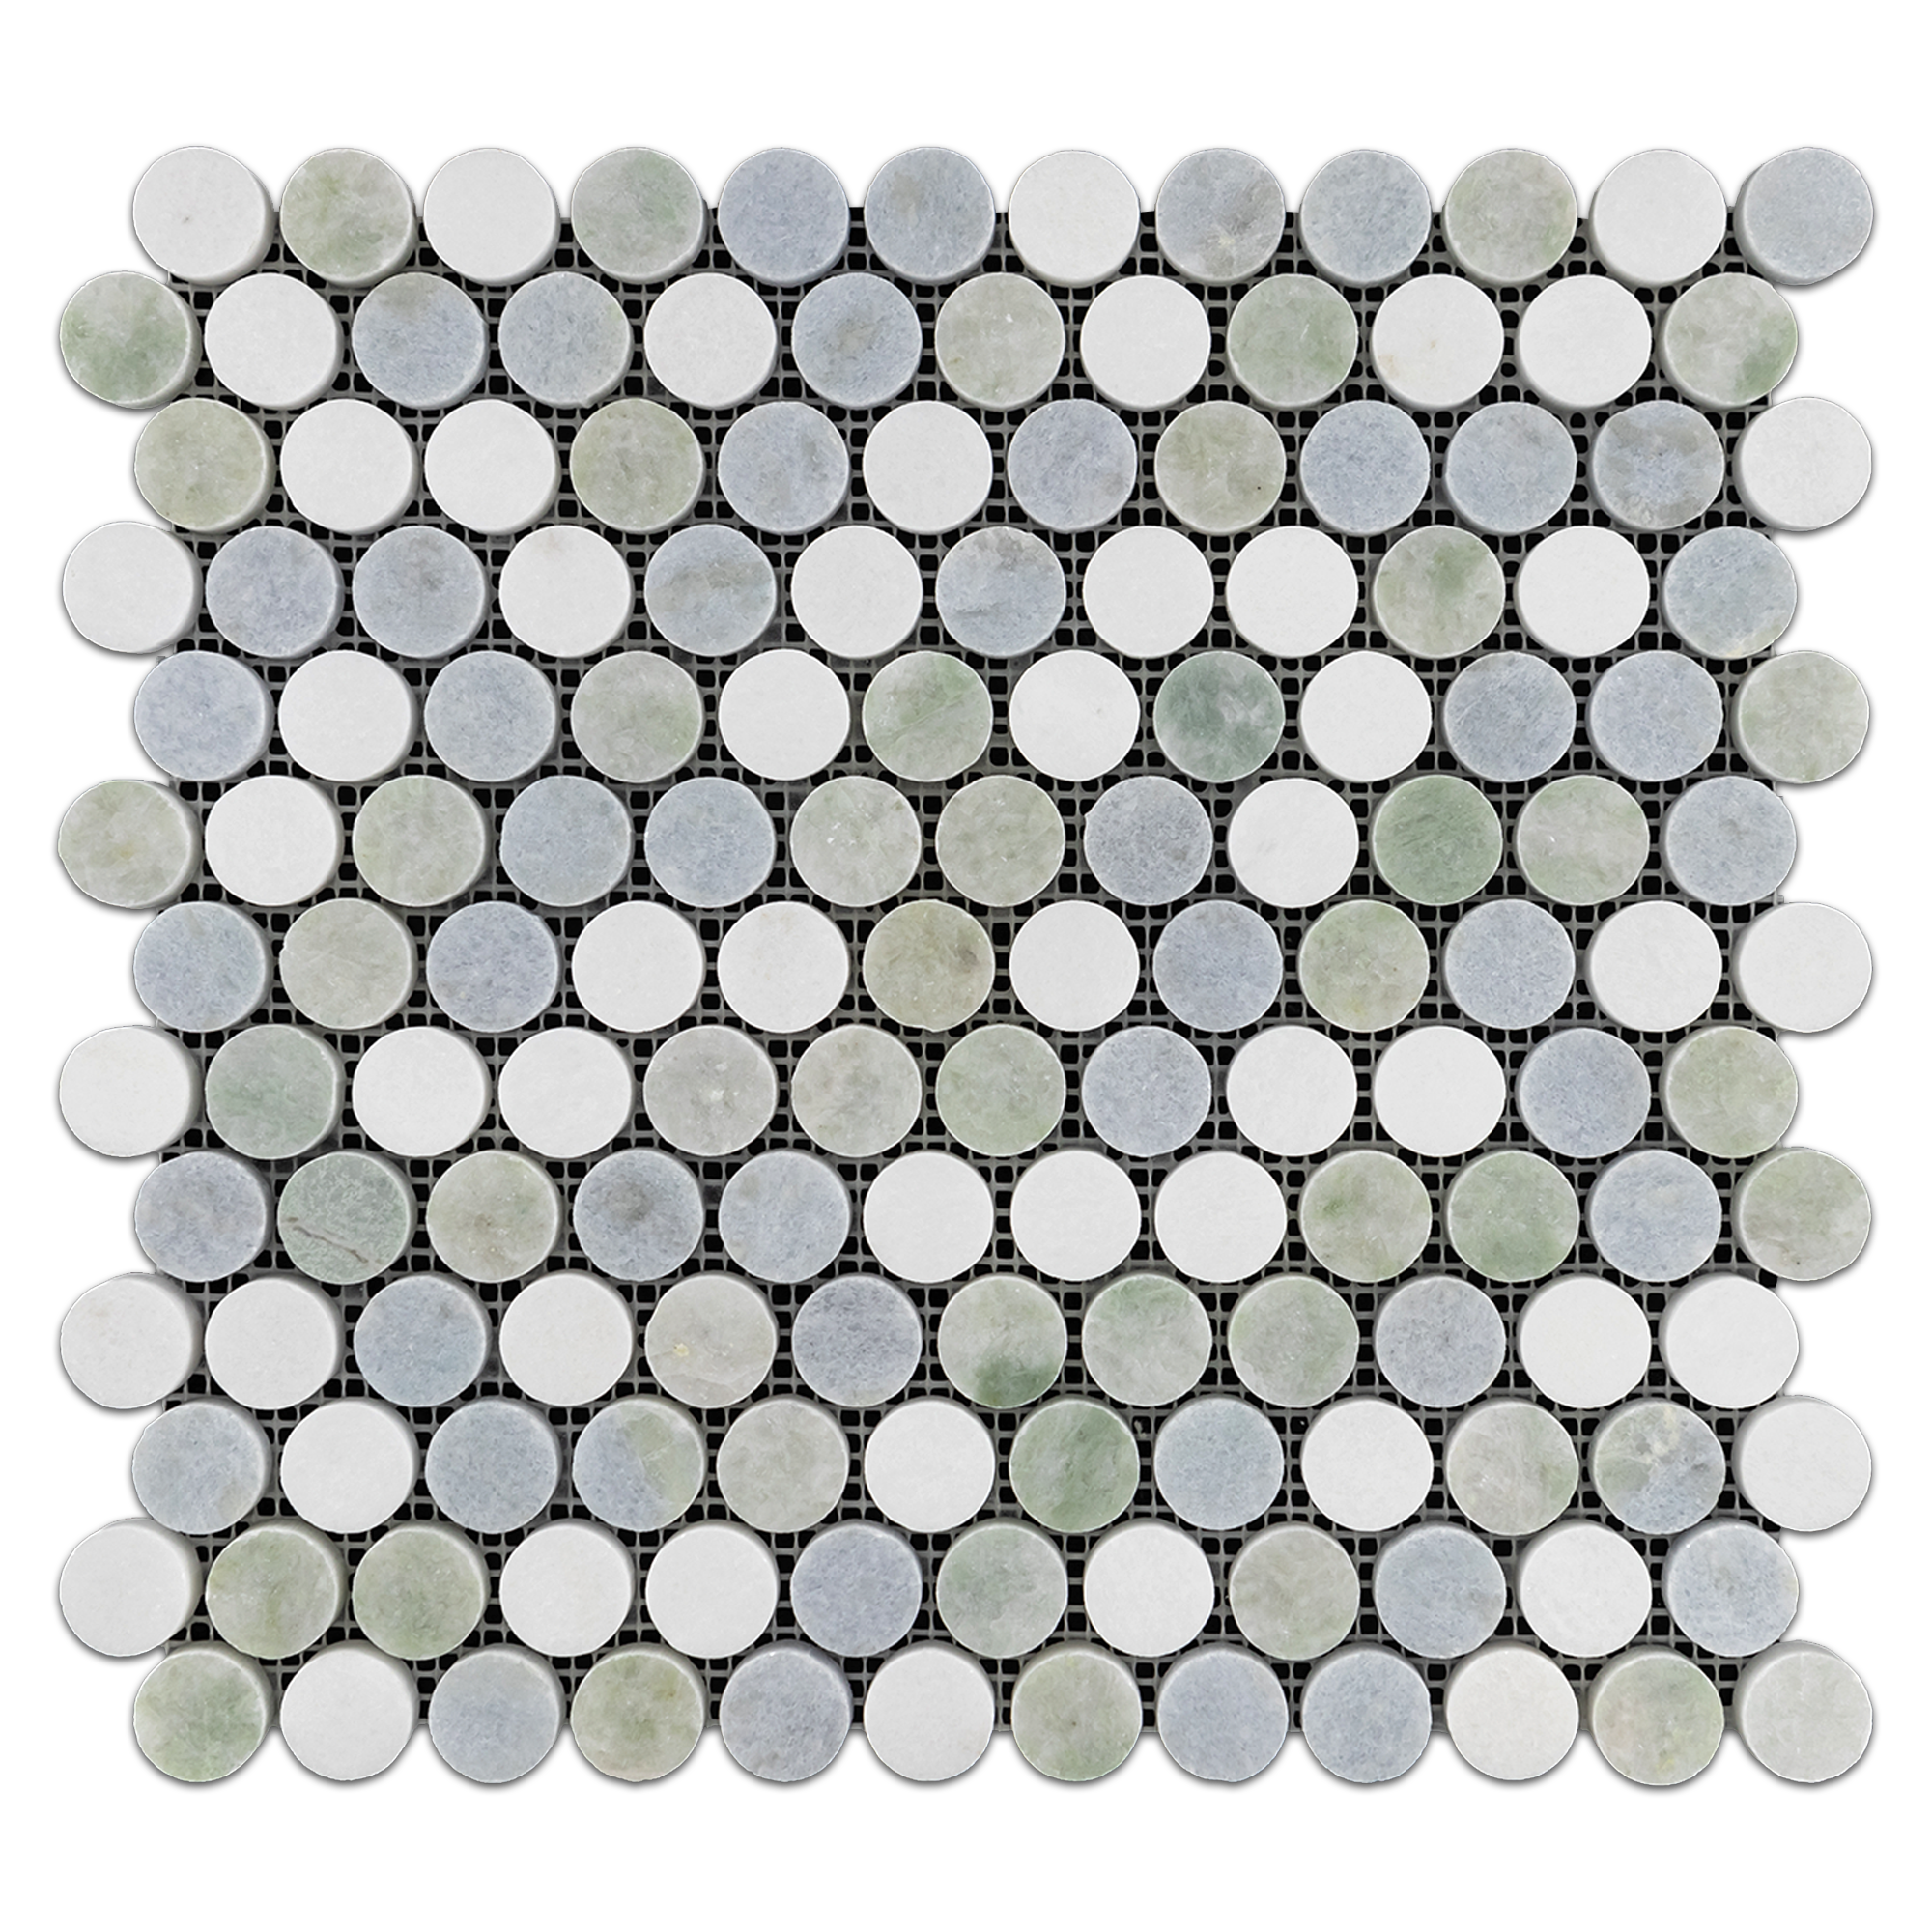 Elon Ming Green White Thassos Blue Celeste Marble Stone Blend Penny Rounds Field Mosaic 11.5625x12.875x0.375 Polished SM1008P Surface Group International Product